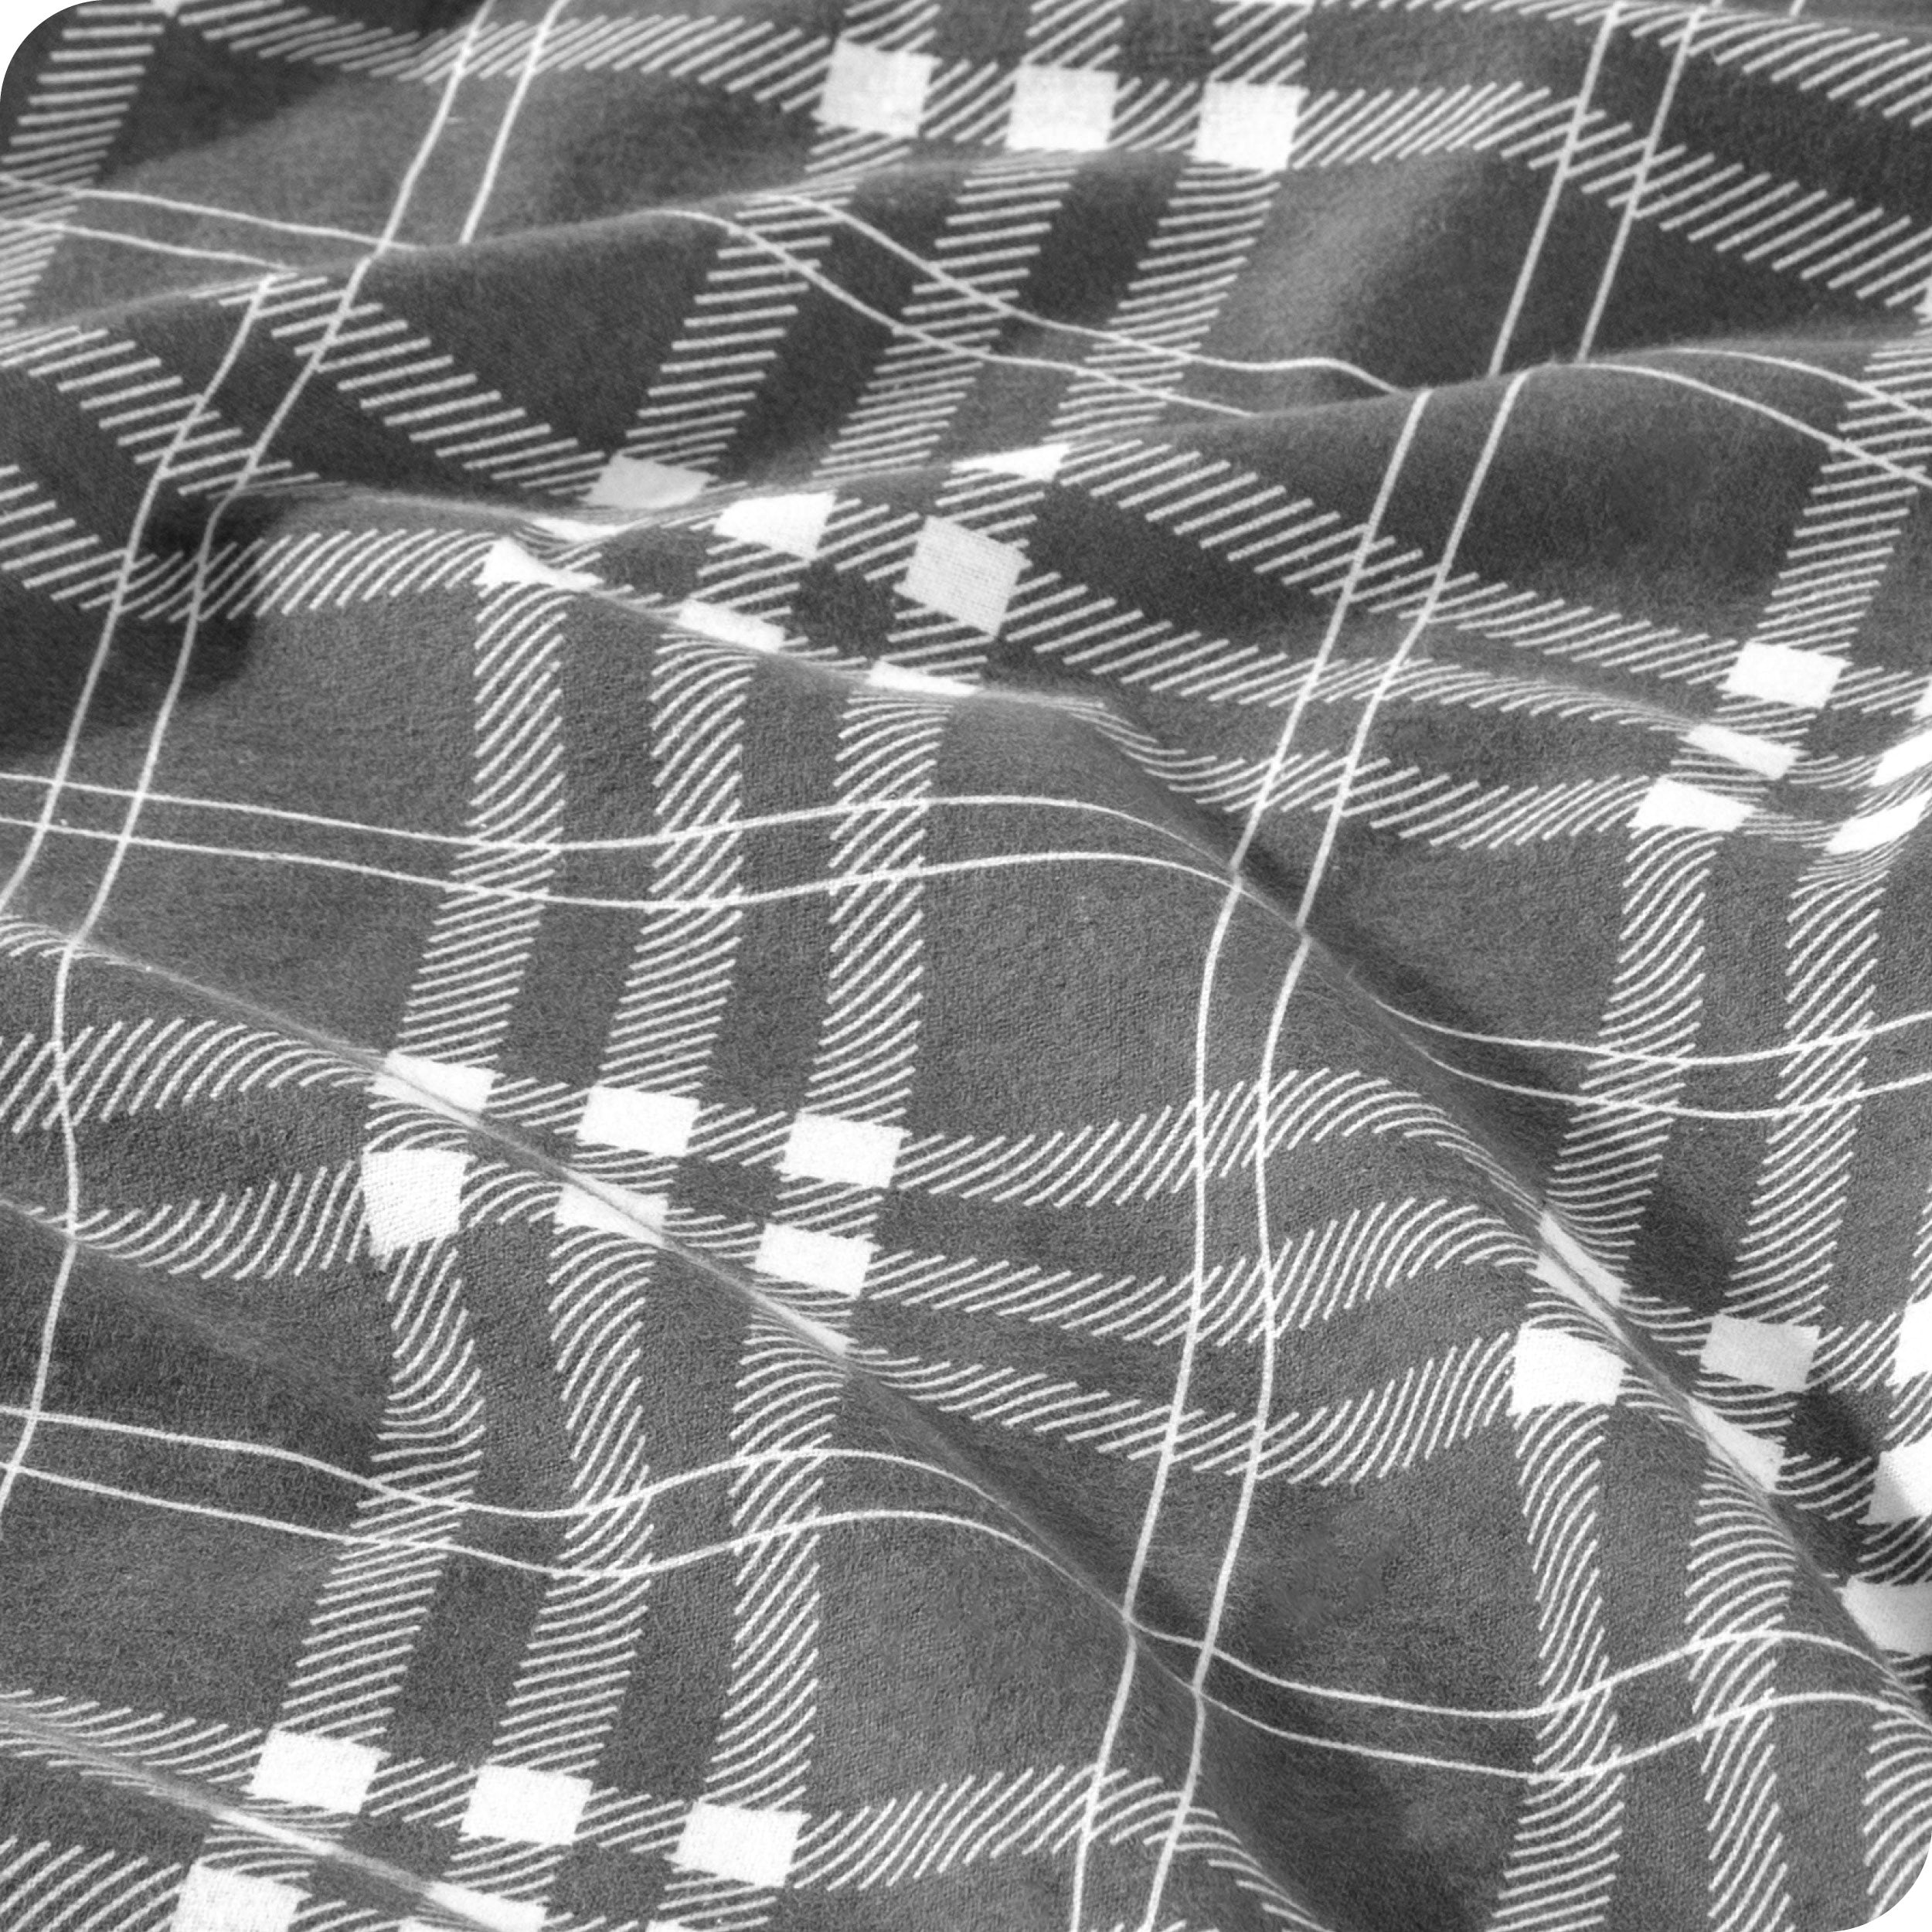 Close up of duvet cover fabric showing the soft texture